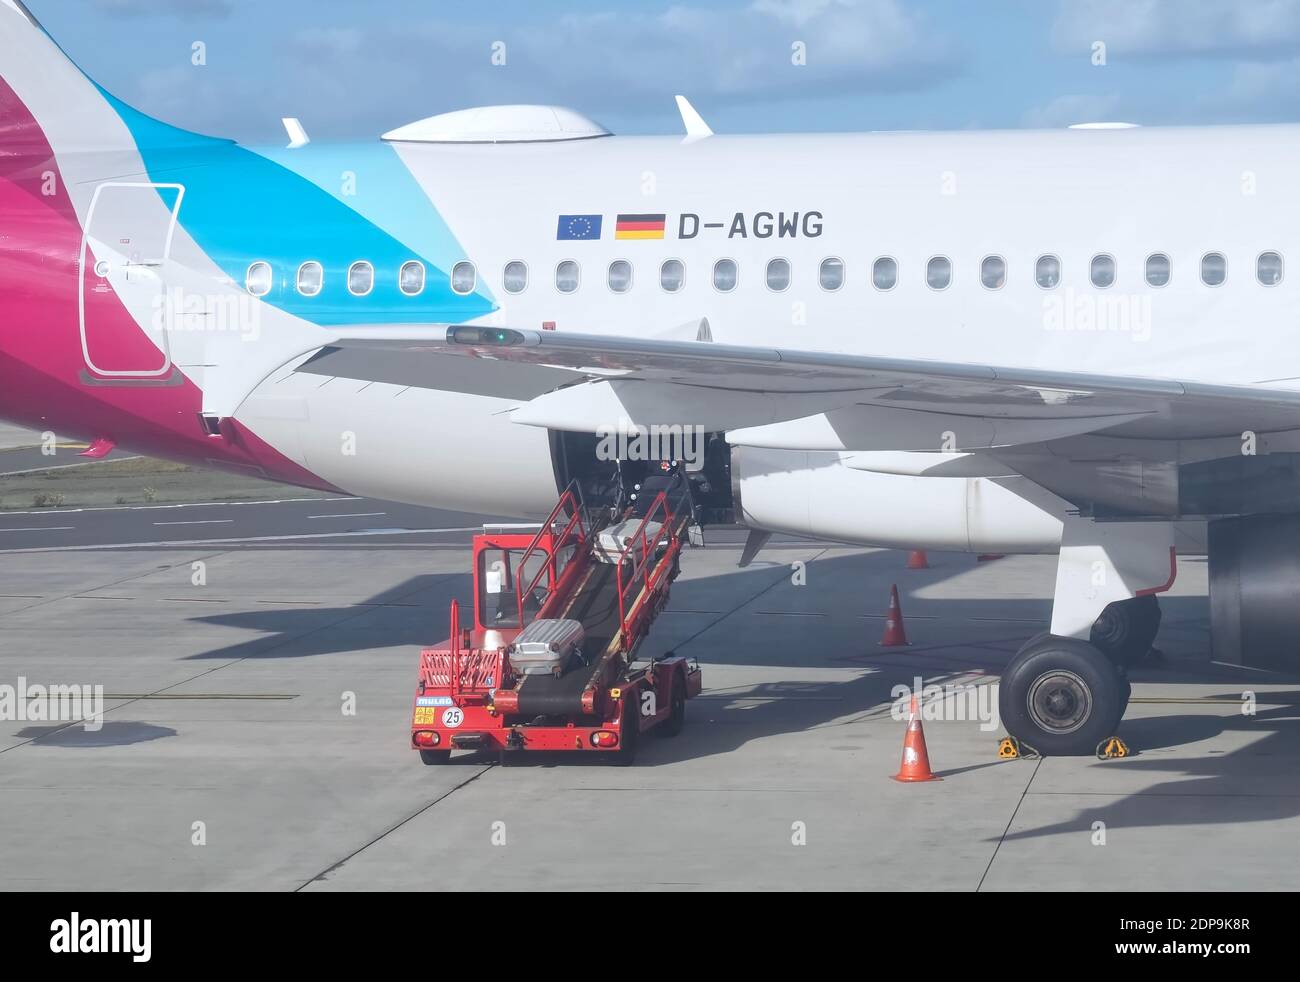 Eurowings airplane at Faro airport in park position is loaded with luggage Stock Photo